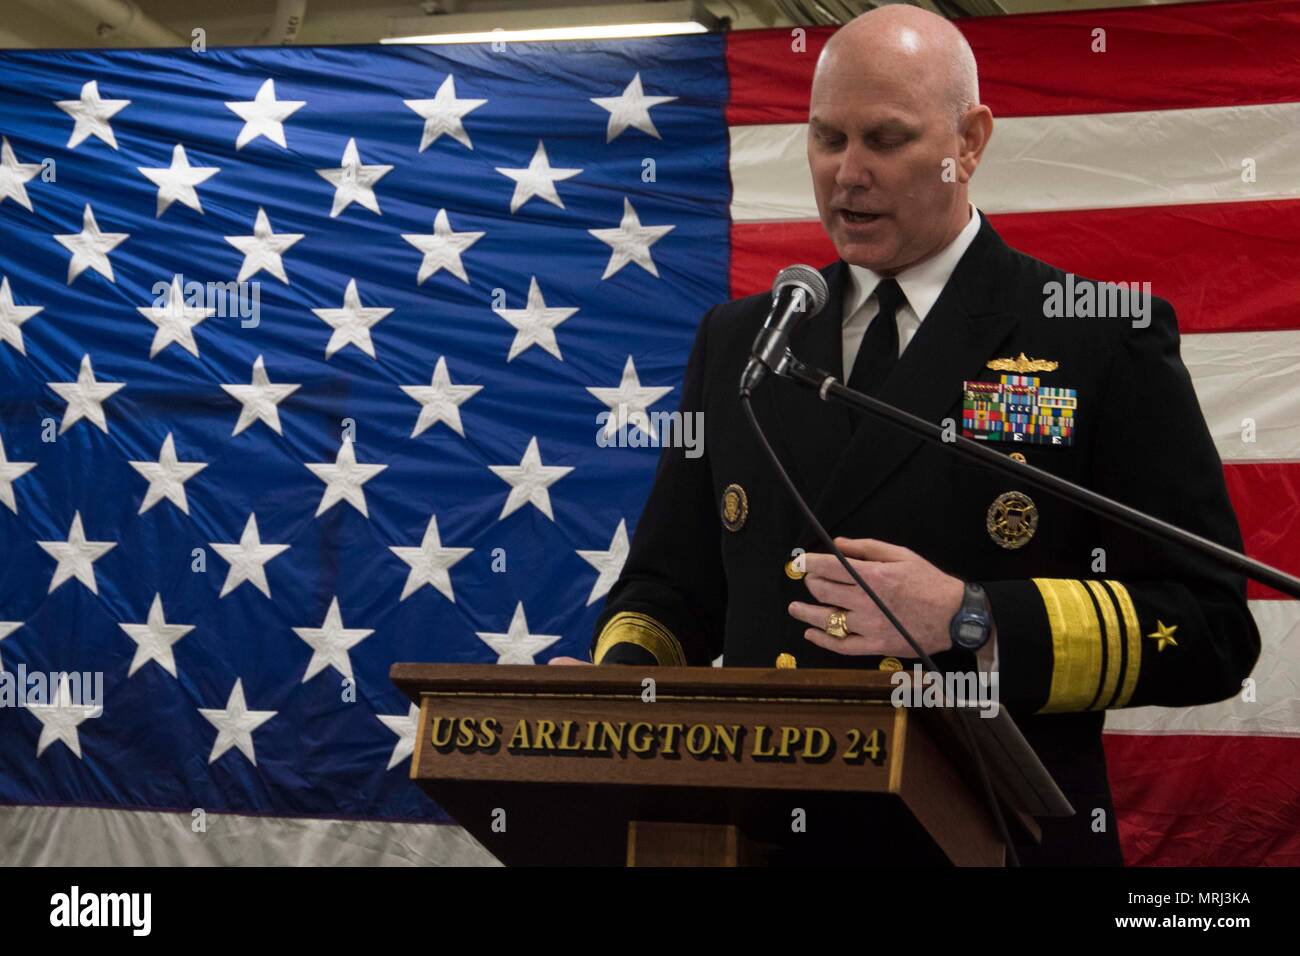 170616-N-GG458-068  KIEL, Germany (June 16, 2017) Vice Adm. Christopher Grady, commander of Naval Striking and Support Forces NATO, delivers remarks at a reception aboard the San Antonio-class amphibious transport dock ship USS Arlington (LPD 24) during exercise BALTOPS 2017. The premier annual maritime-focused exercise in the Baltic region is one of the largest exercises in Northern Europe. (U.S. Navy photo by Mass Communication Specialist 2nd Class Stevie Tate/Released) Stock Photo